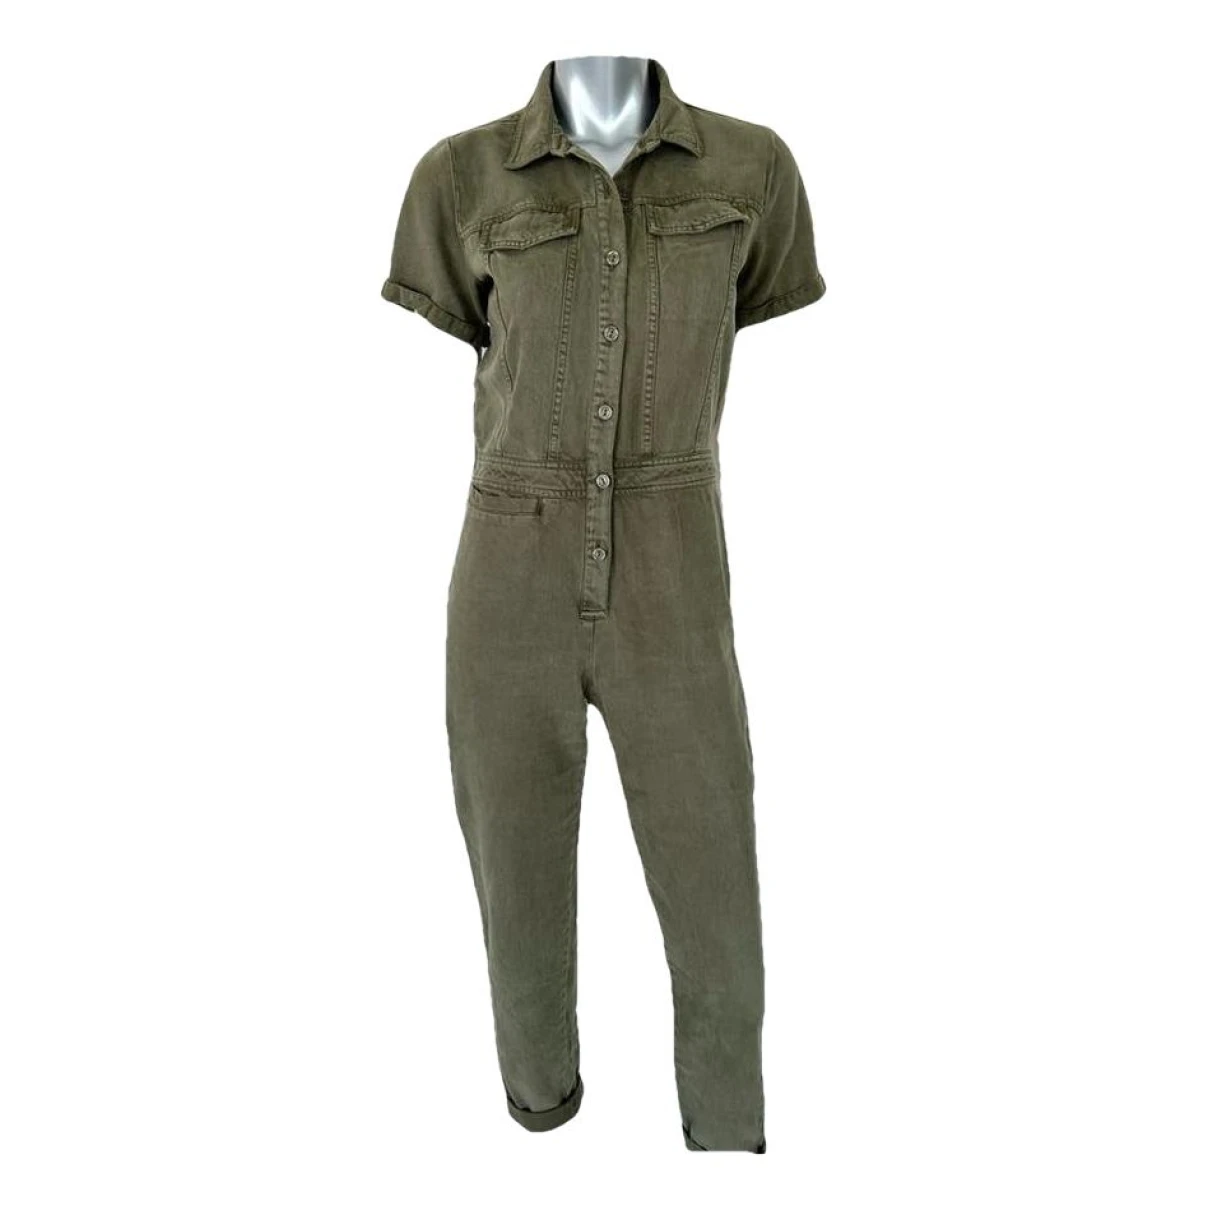 clothing Young Fabulous & Broke jumpsuits for Female Denim - Jeans XS International. Used condition